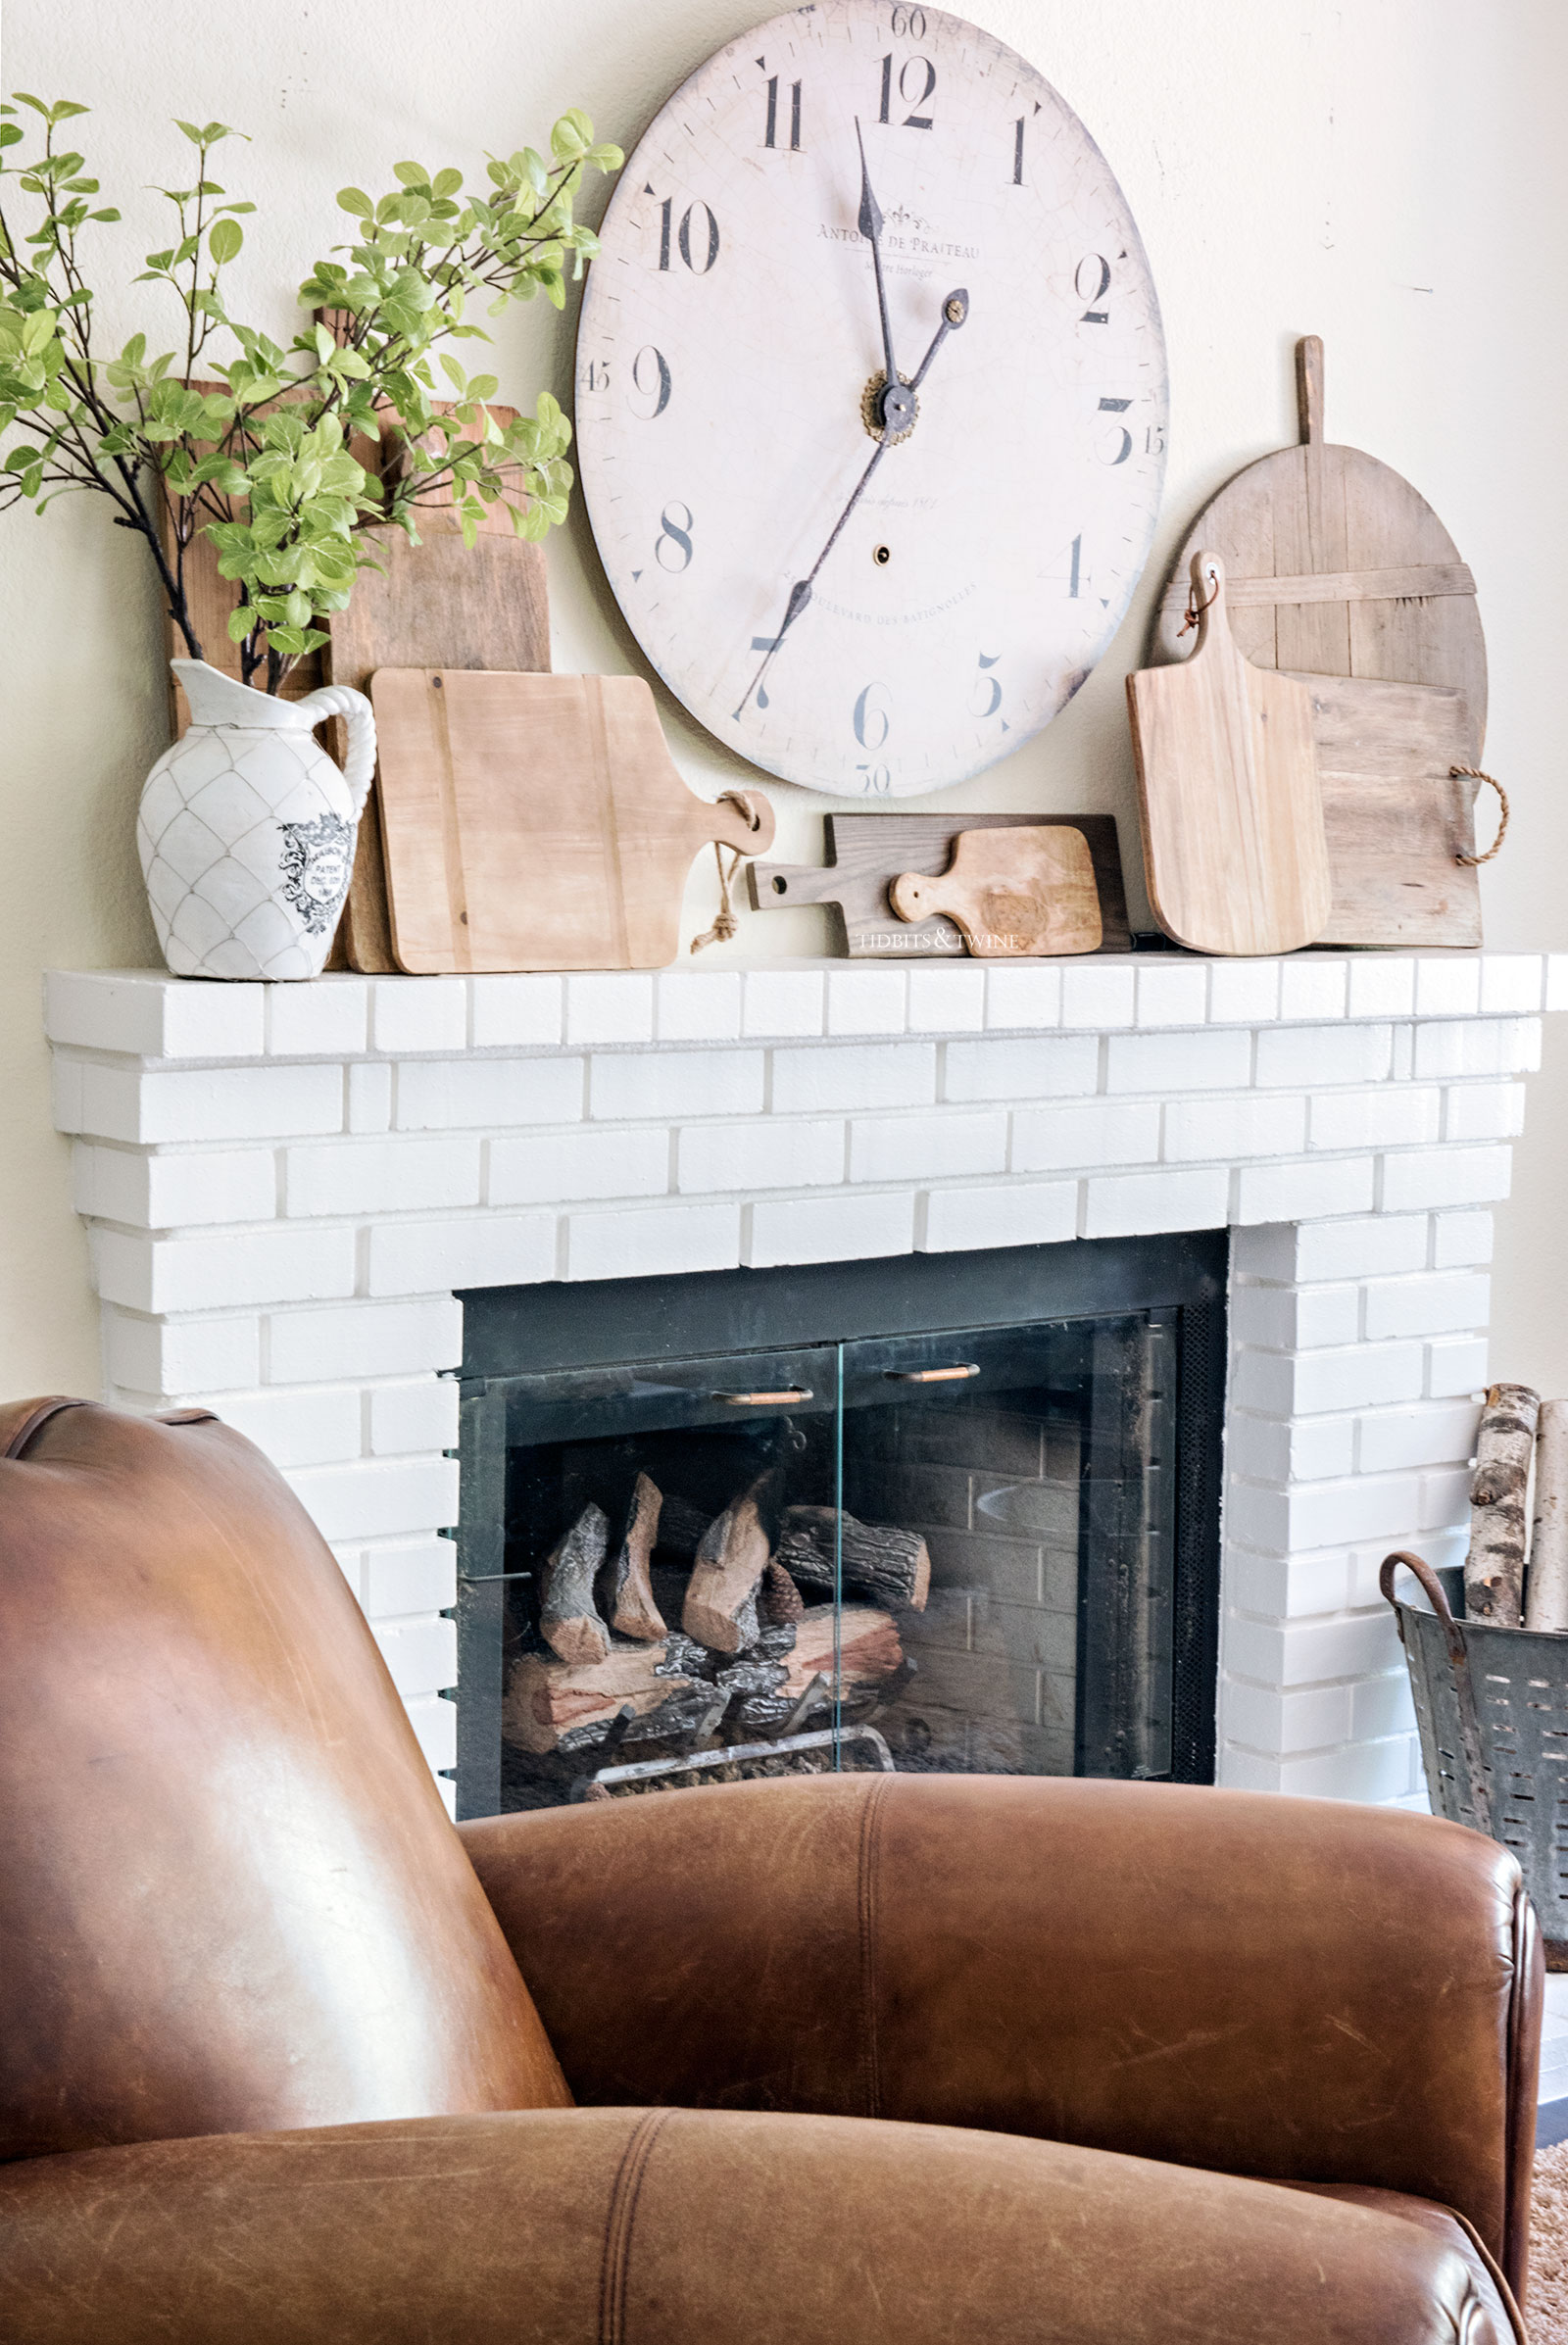 wooden cutting board collection on white brick mantel with leather chair in front